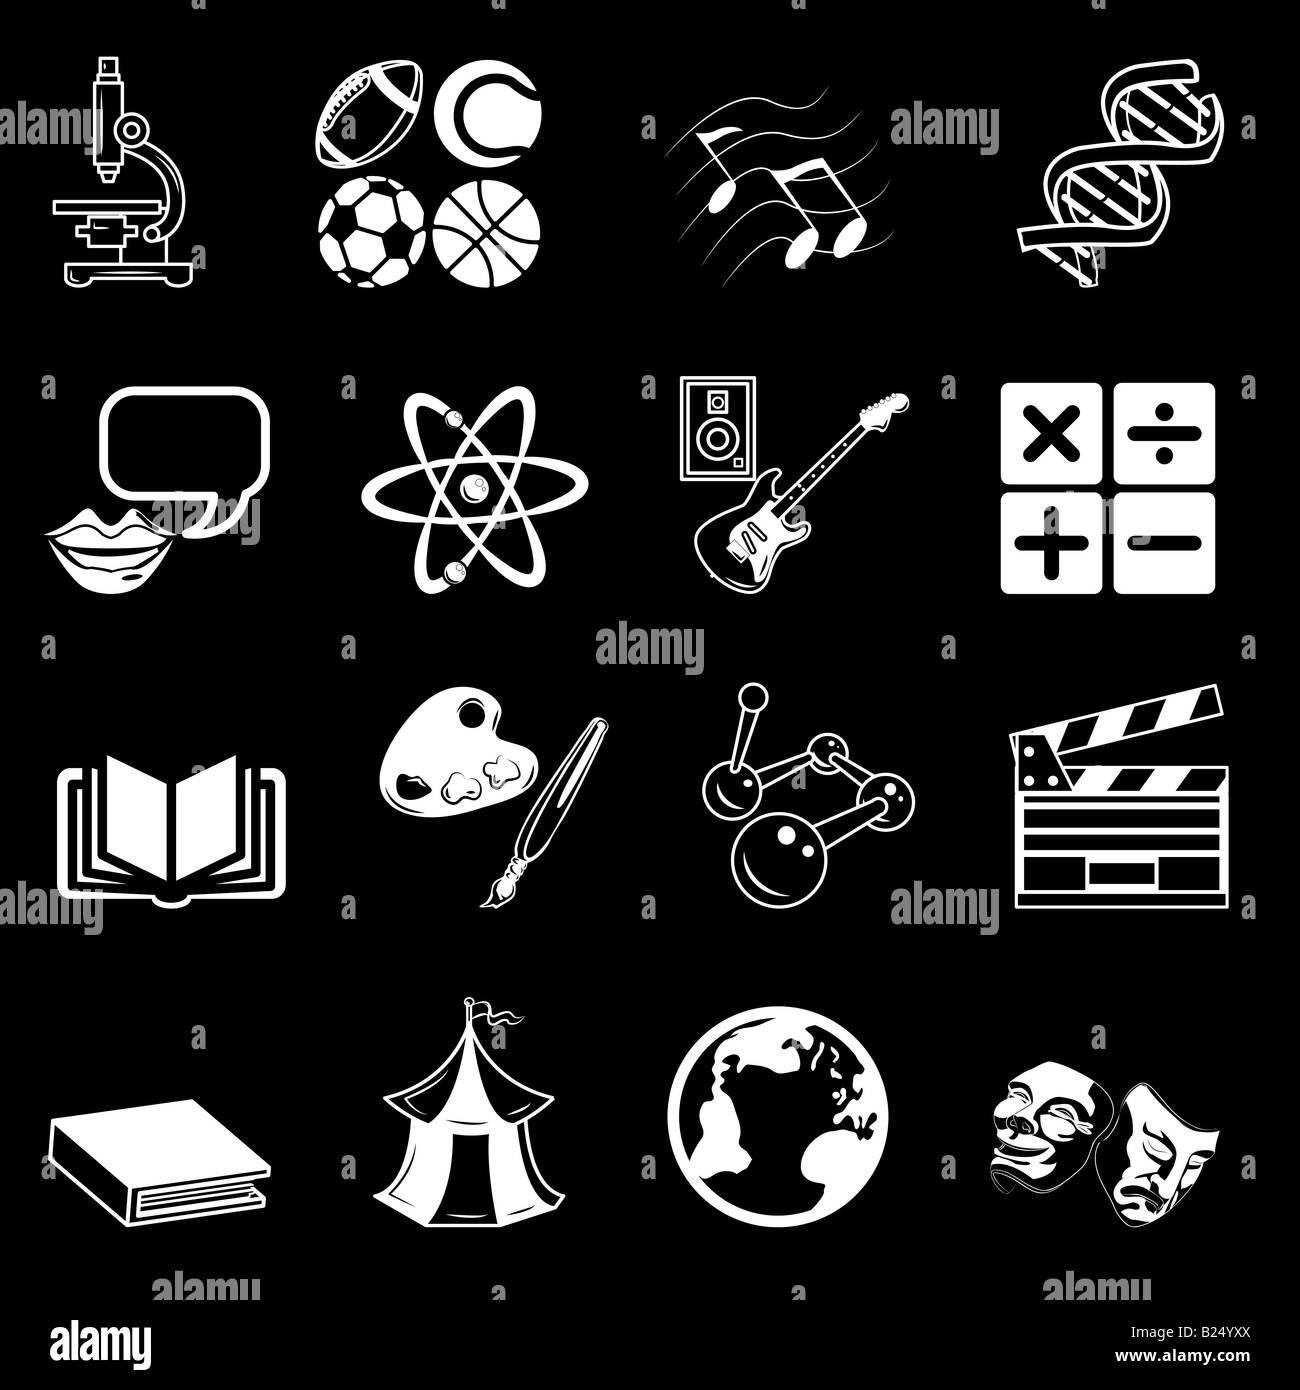 a subject category icon set eg. science, maths, language, literature, history, geography, musical, physical education etc Stock Photo